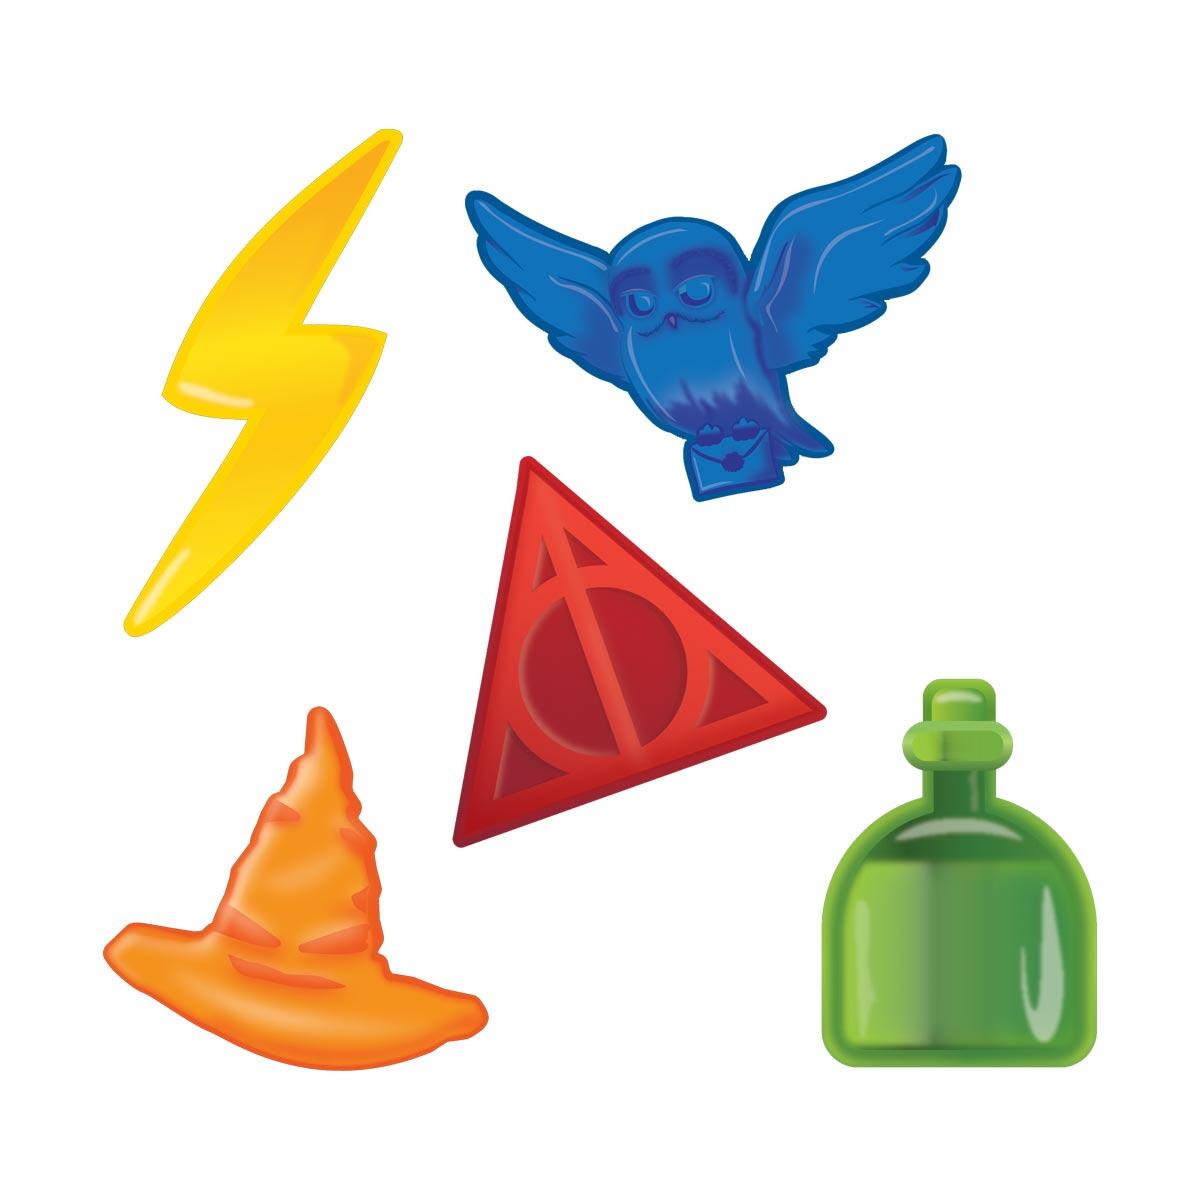 Harry Potter Gummies Magical Sweet Shapes Yellow Lightening, Blue Owl, Red Deathly Hallows, Orange Sorting Hat, Green Potion Bottle 